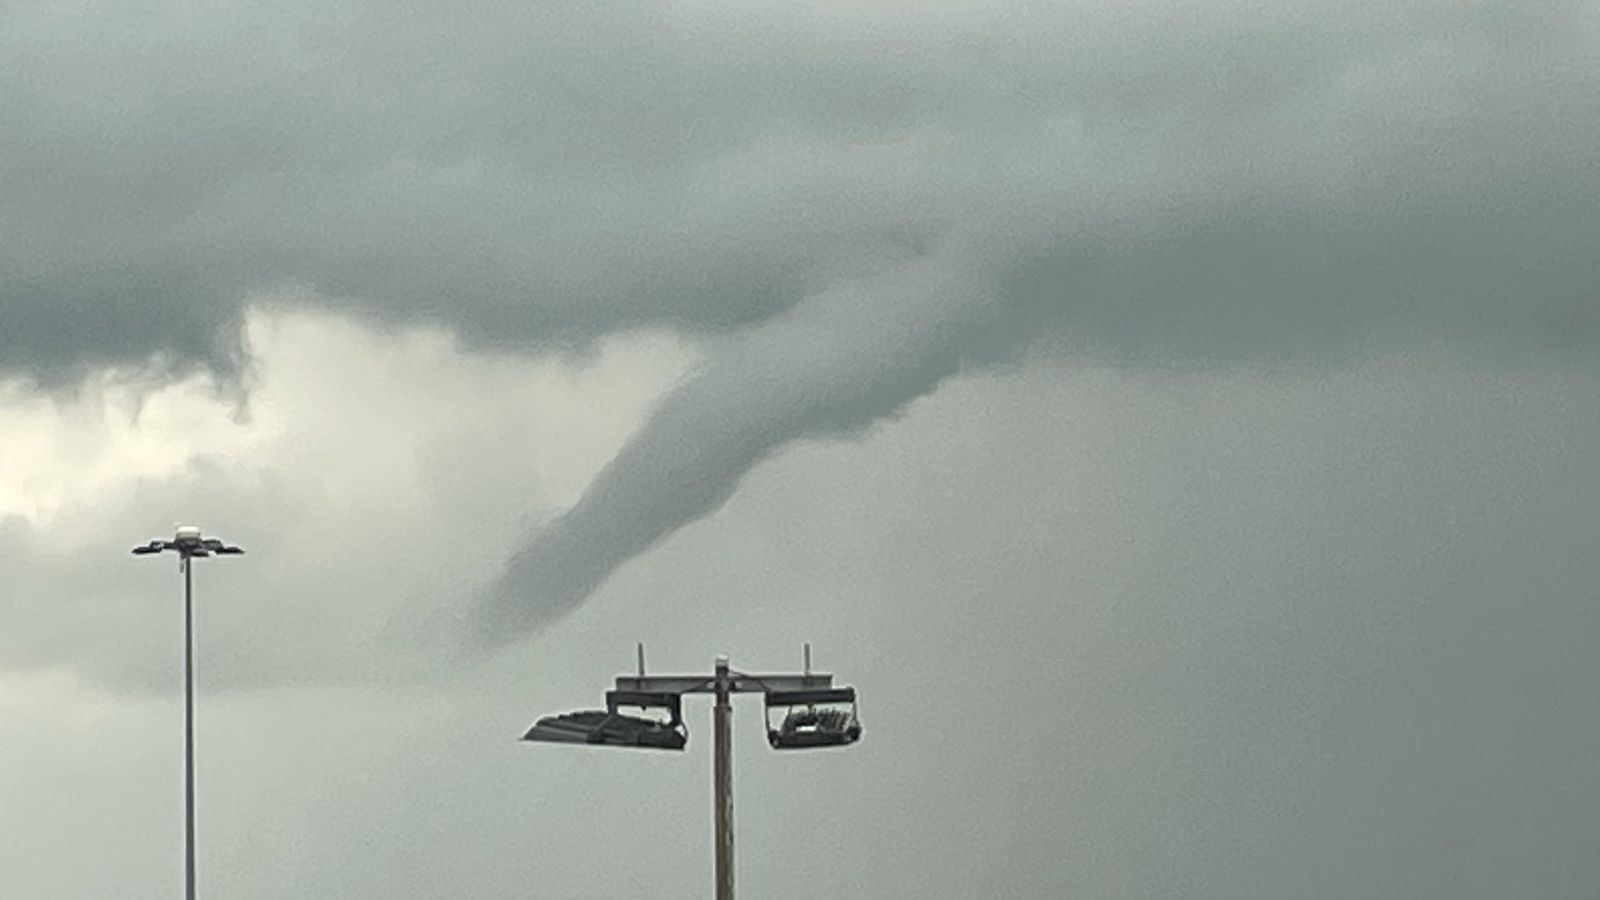 UK weather: Ominous funnel clouds spotted as nation is battered by downpours